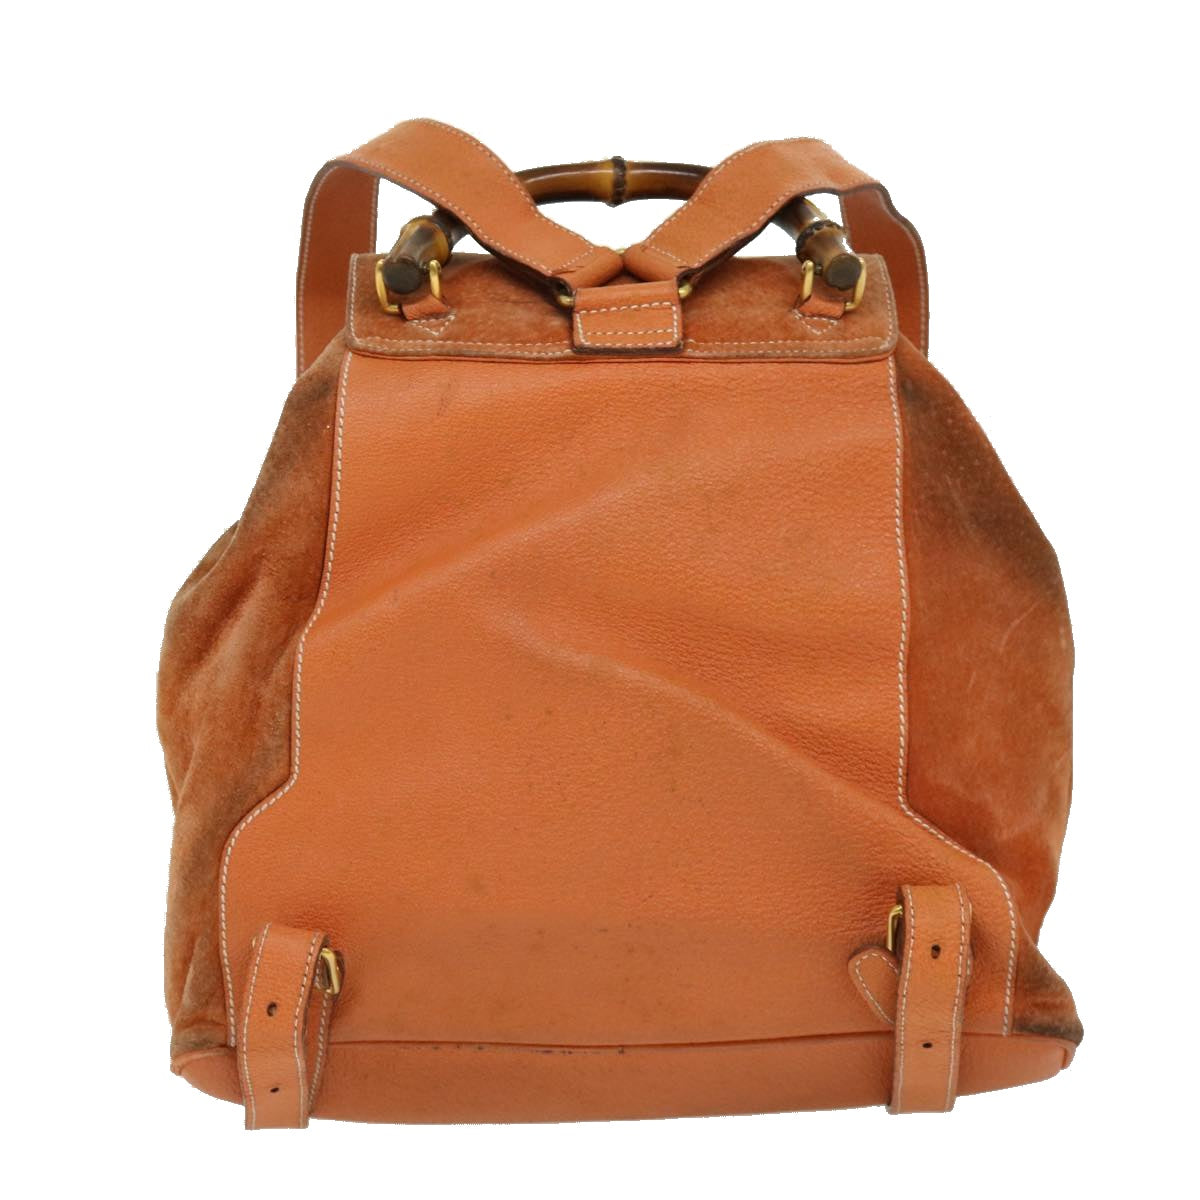 GUCCI Bamboo Backpack Suede Leather Orange Auth th3041 - 0